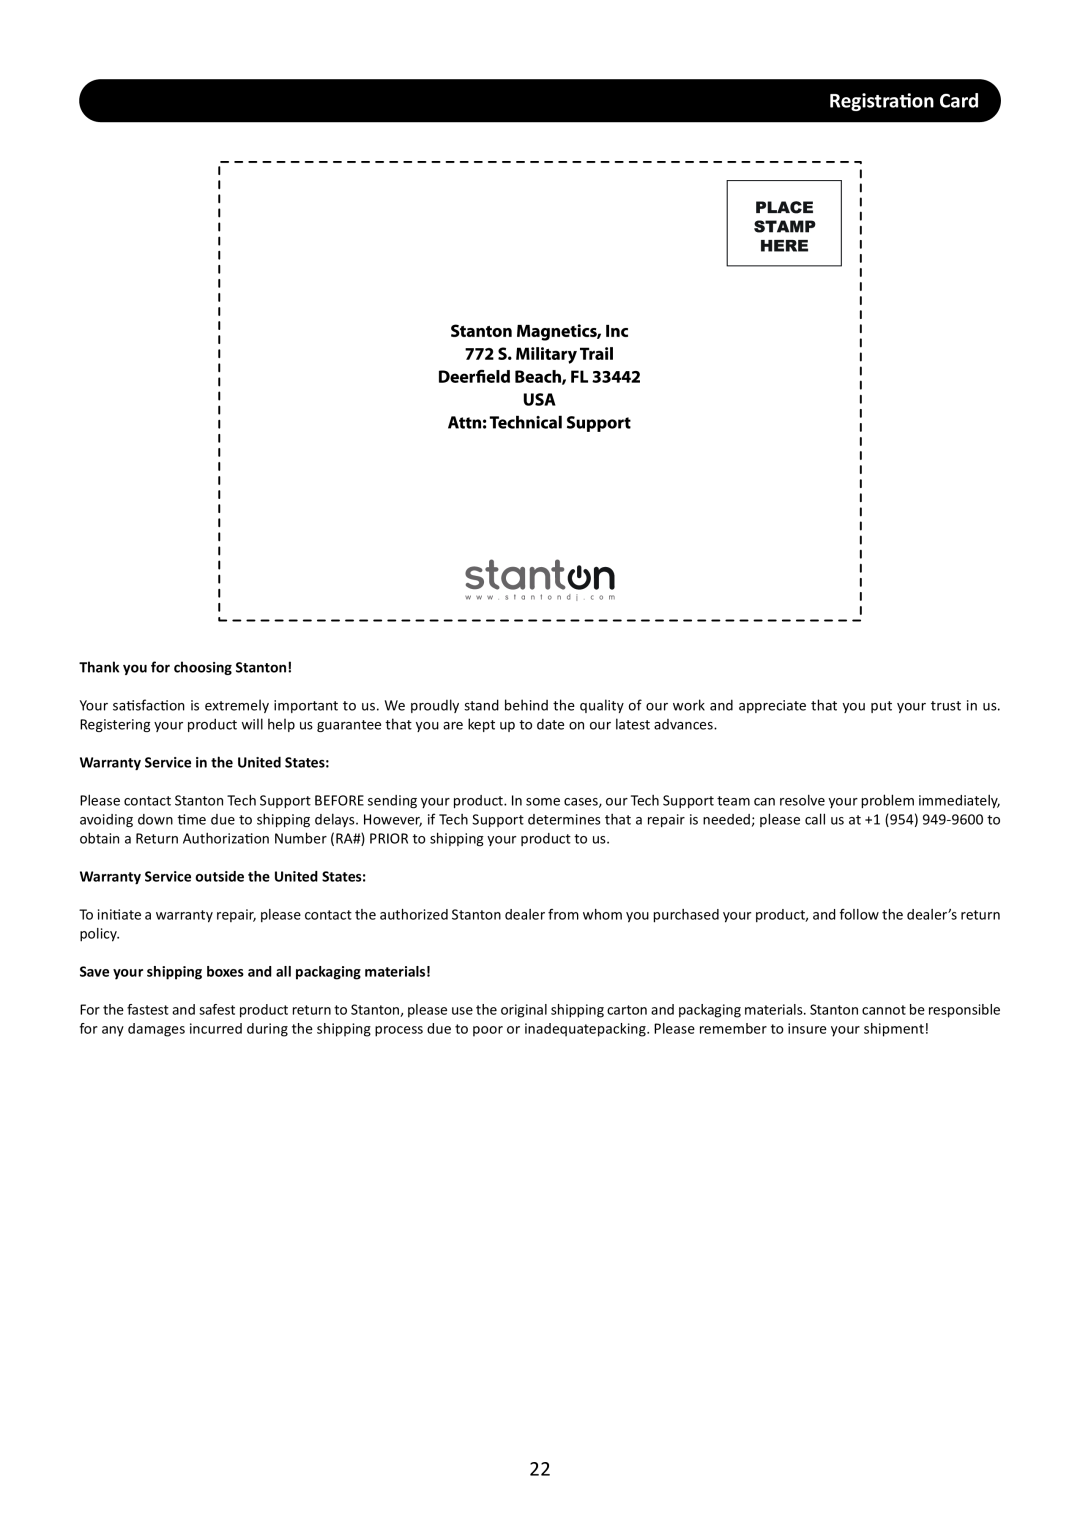 Stanton M.207 user manual Registration Card, Thank you for choosing Stanton, Warranty Service in the United States 